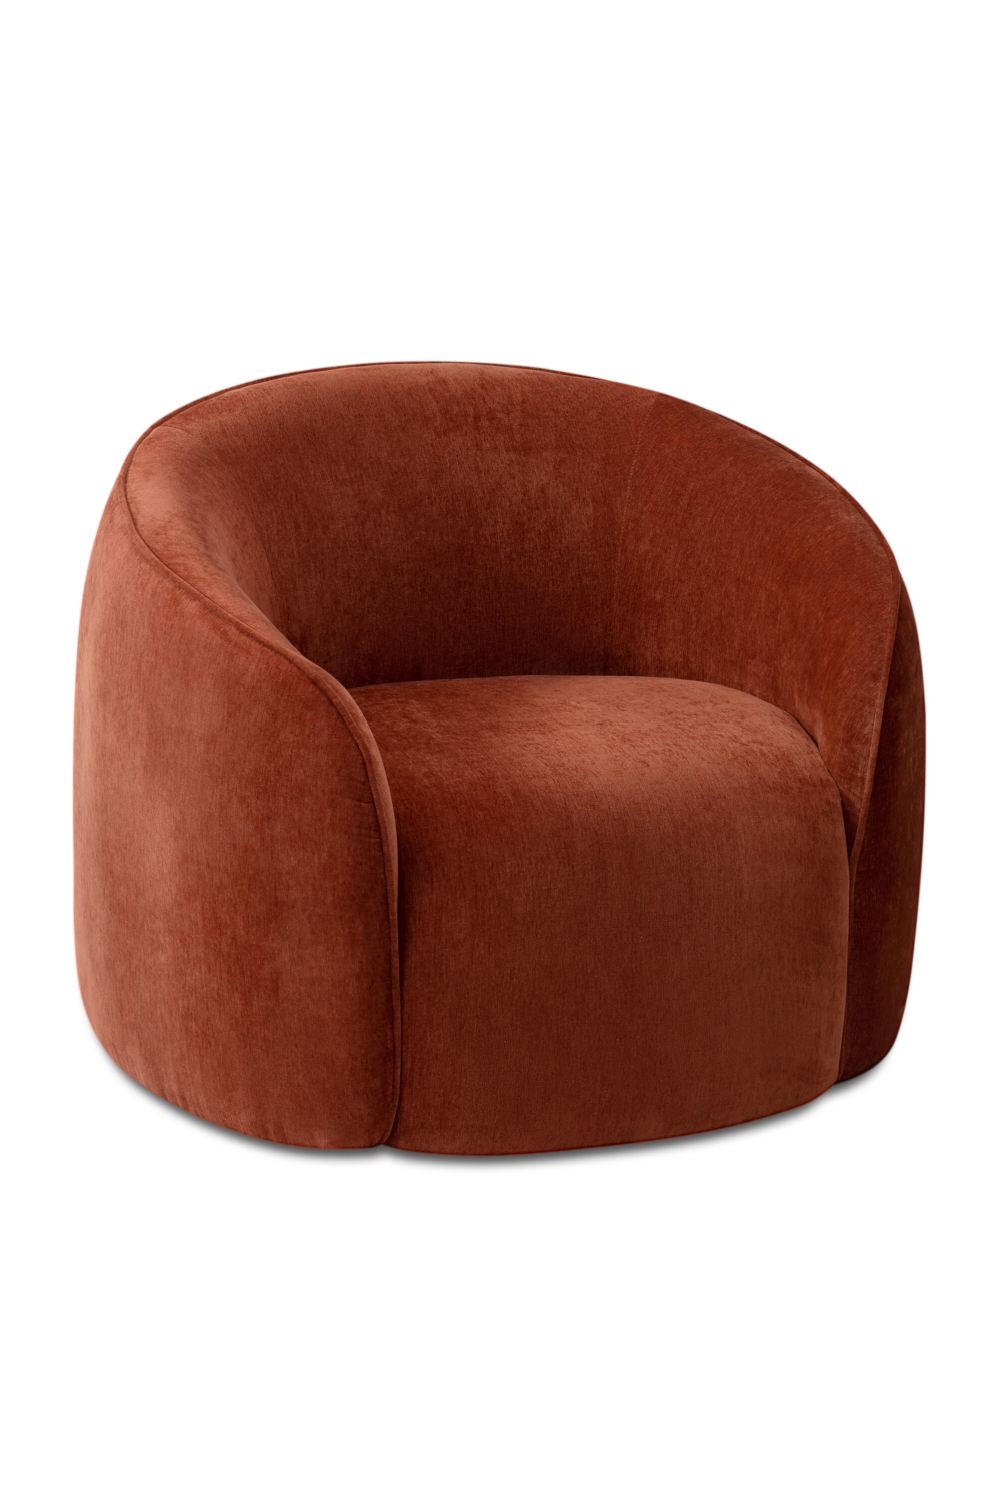 Rounded Modern Occasional Chair | Liang & Eimil Polta | Oroa.com